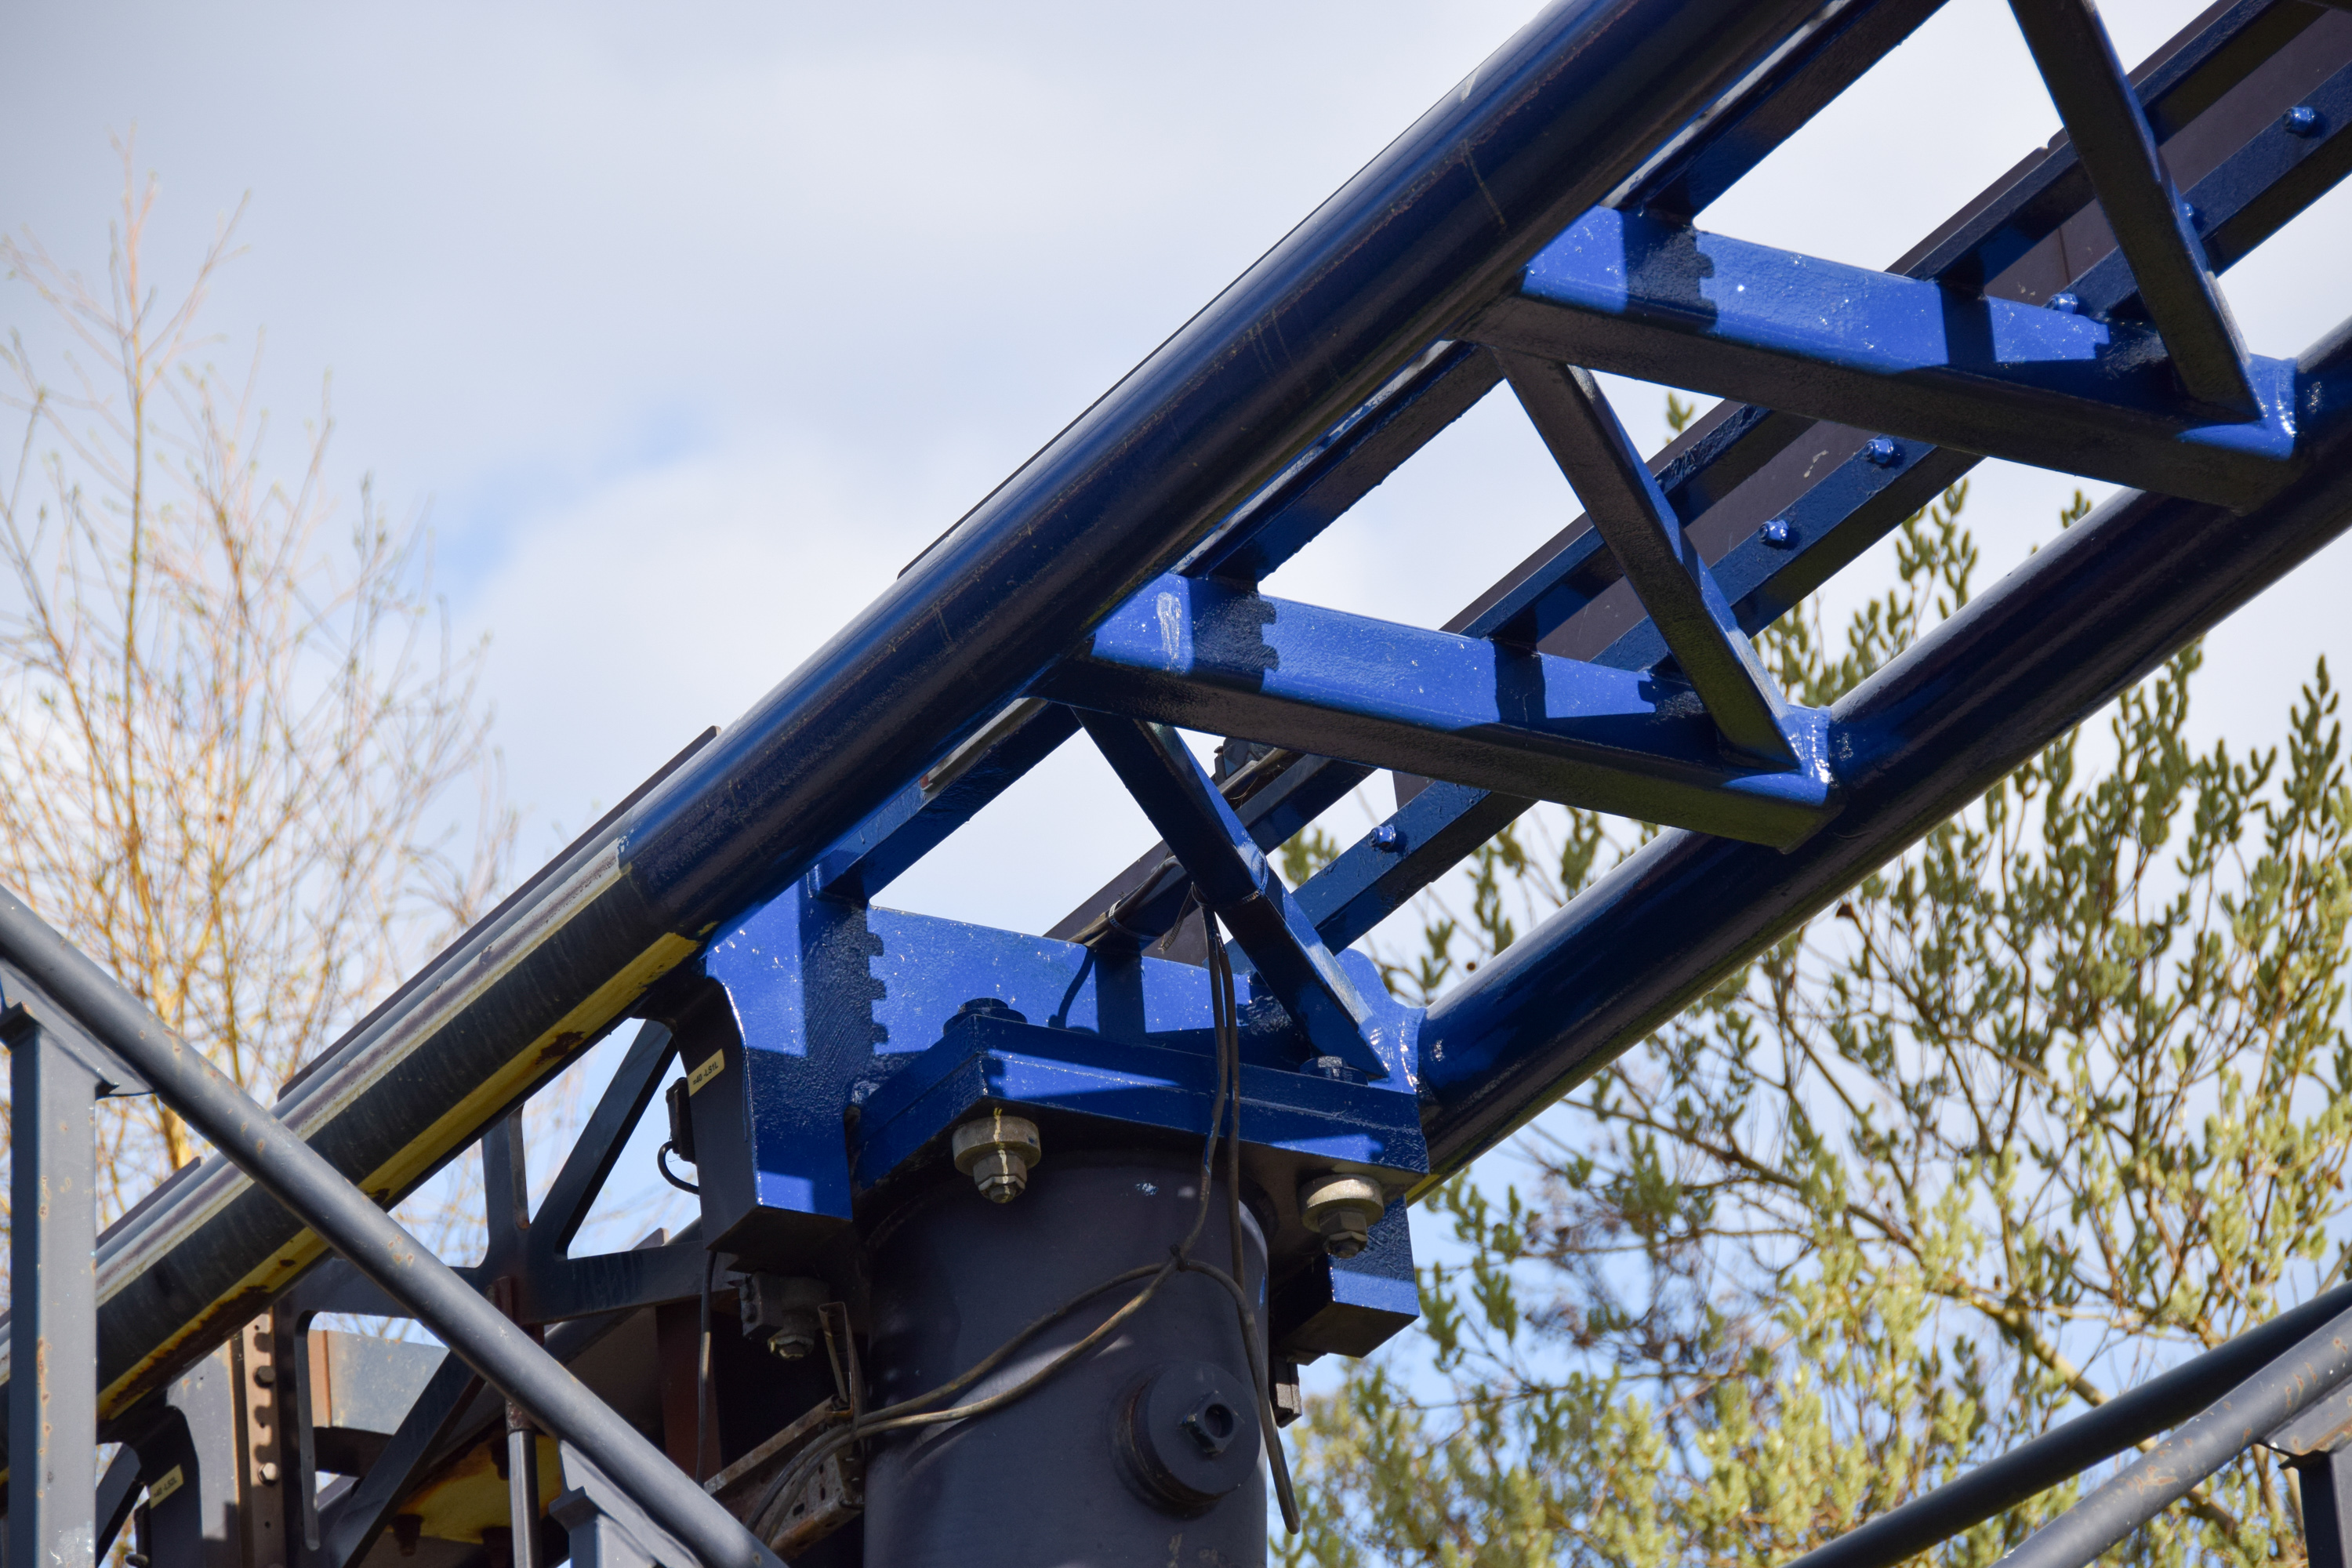 Thorpe Park Stealth Has Section Of Track Repainted